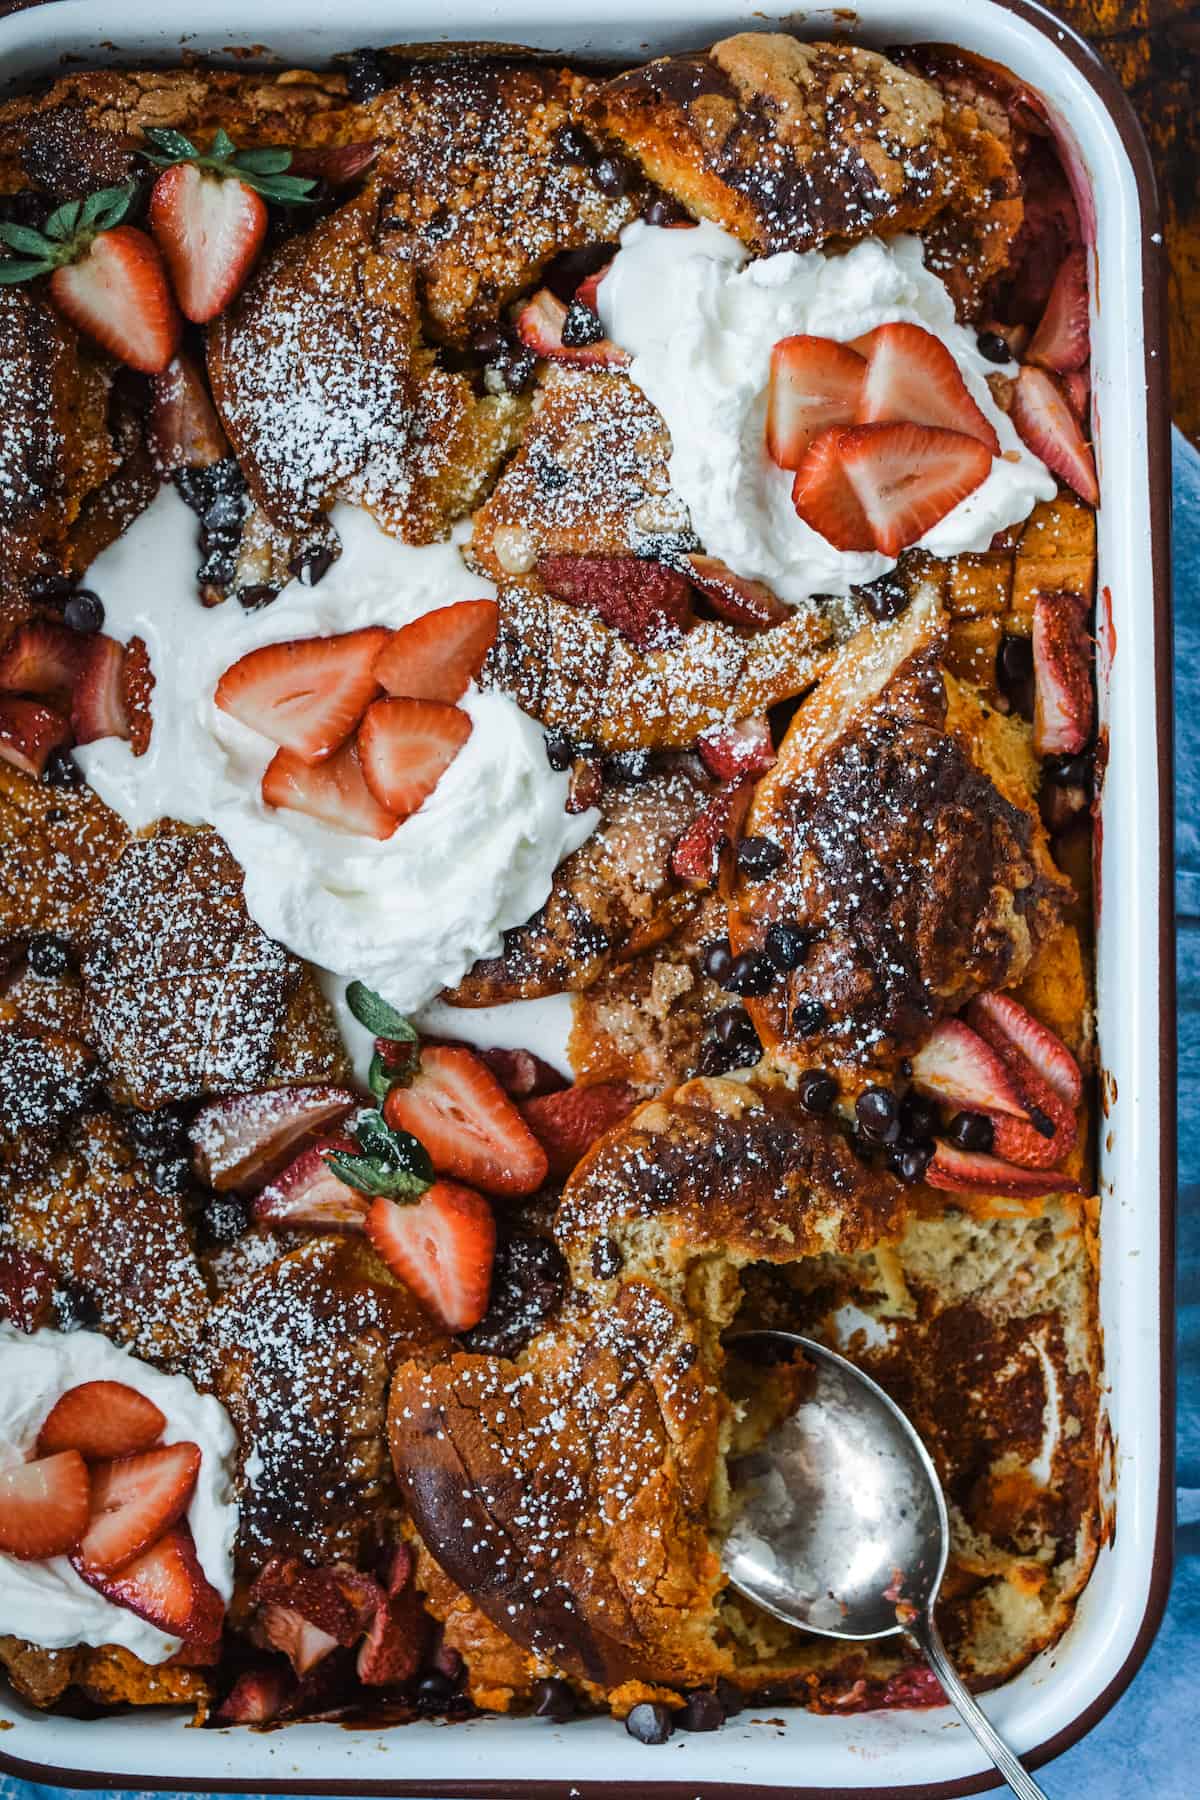 This totally indulgent French Toast Casserole is made with Conchas, the traditional Mexican sweet bread and soaked in a classic tres leches mixture of sweetened condensed milk, whole milk, and heavy cream. If that wasn't enough it then gets topped with chocolate chips, orange-scented strawberries, and whipped cream. Assemble the night before for an outrageously good breakfast the next morning! #frenchtoastcasserole #bakedfrenchtoast #tresleches #conchas